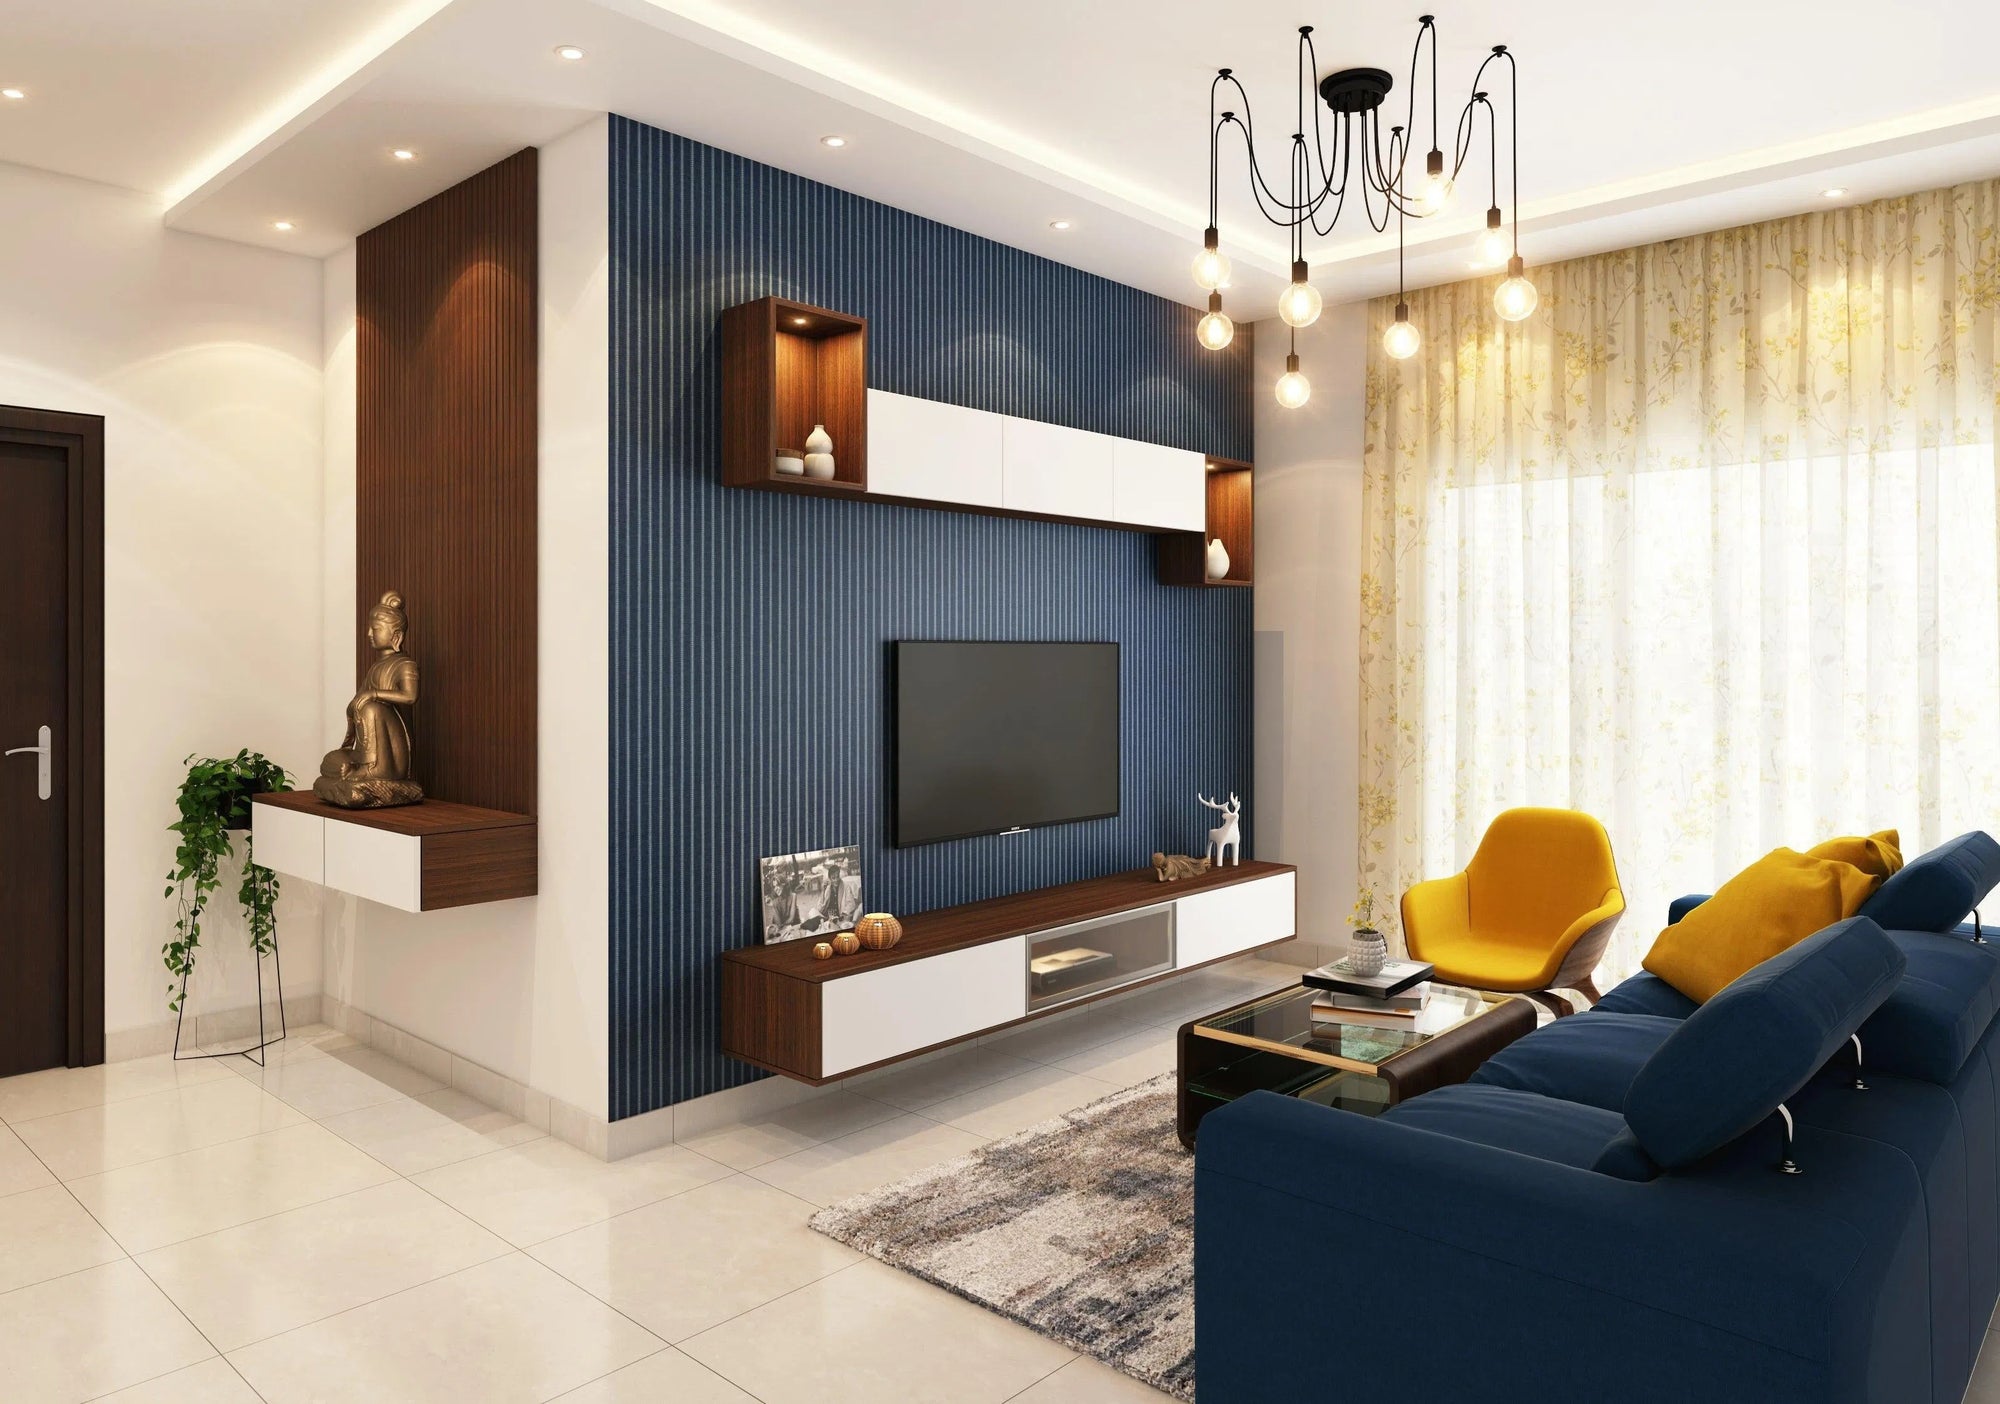 2023 Home Goals: 5 Living Room Ideas to Love Your Home